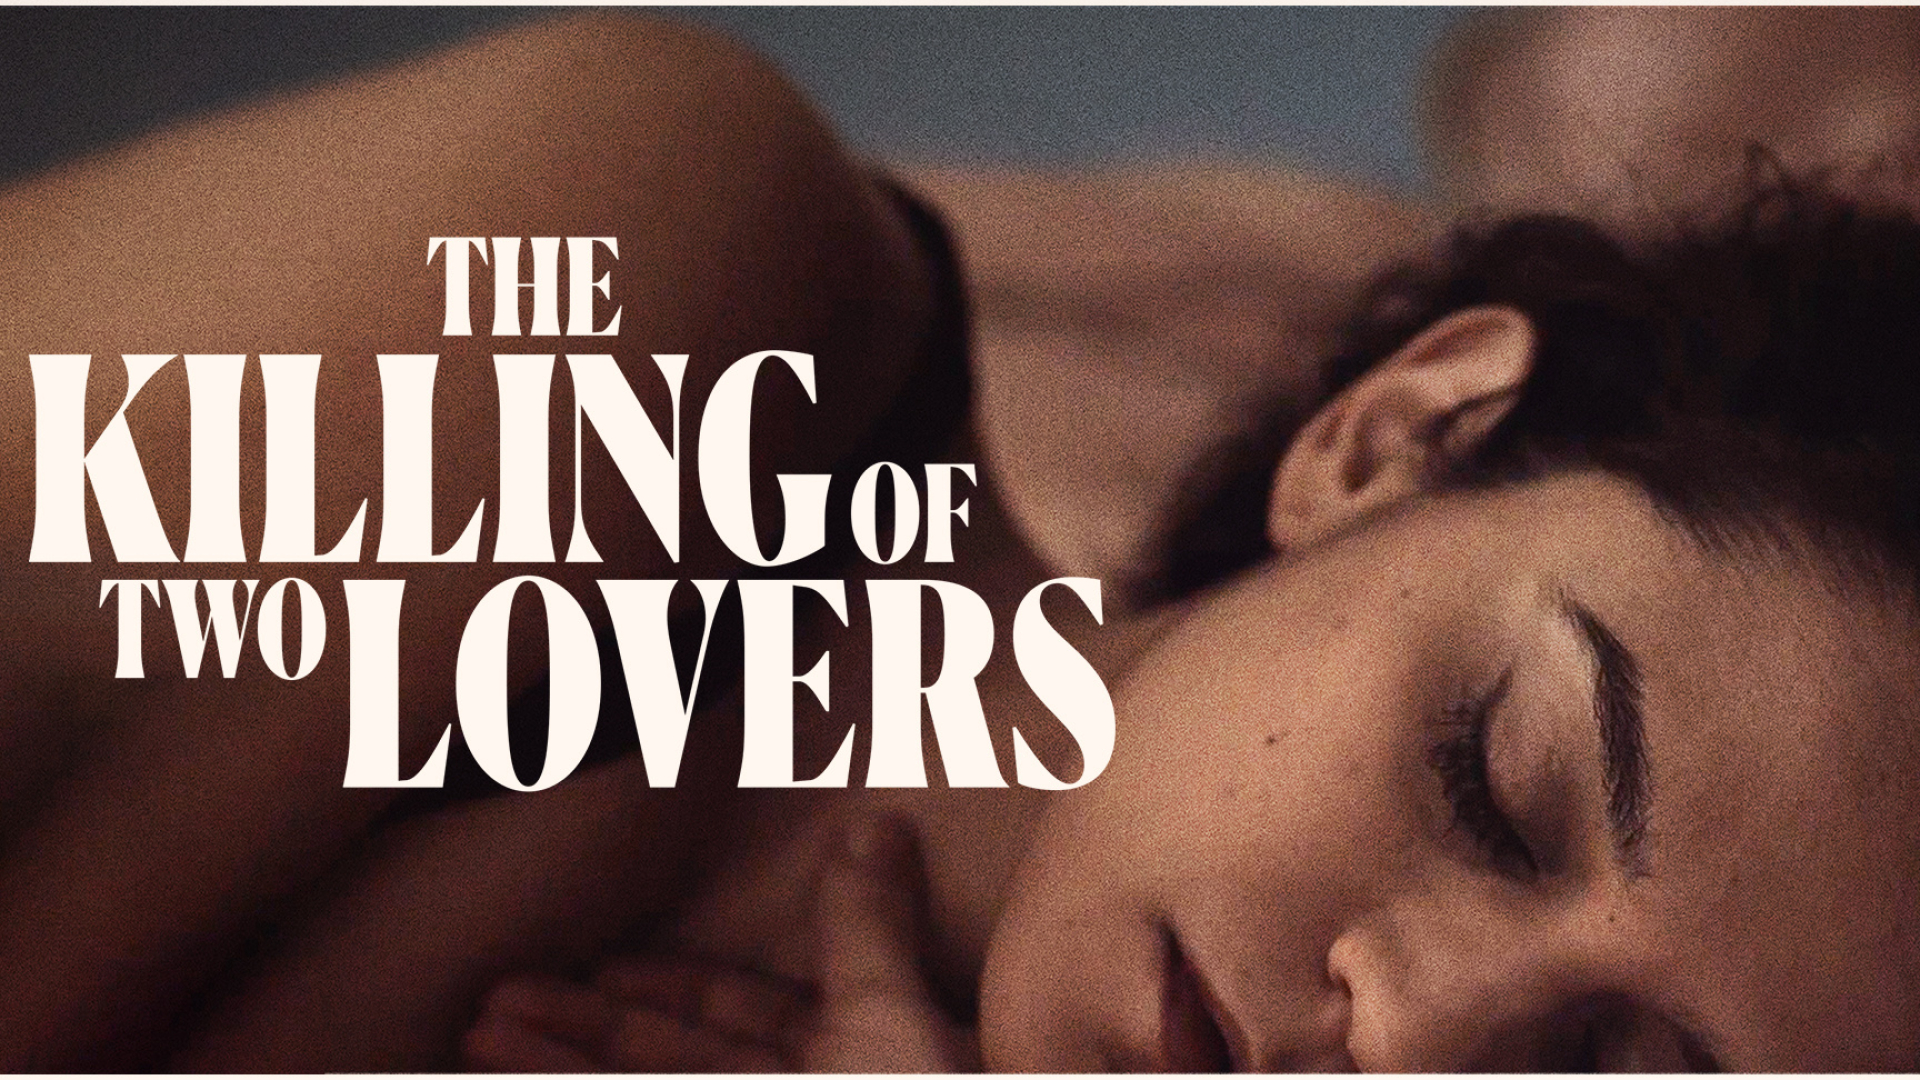 The Killing of Two Lovers, Movies, Watch or stream, Two Lovers, 1920x1080 Full HD Desktop